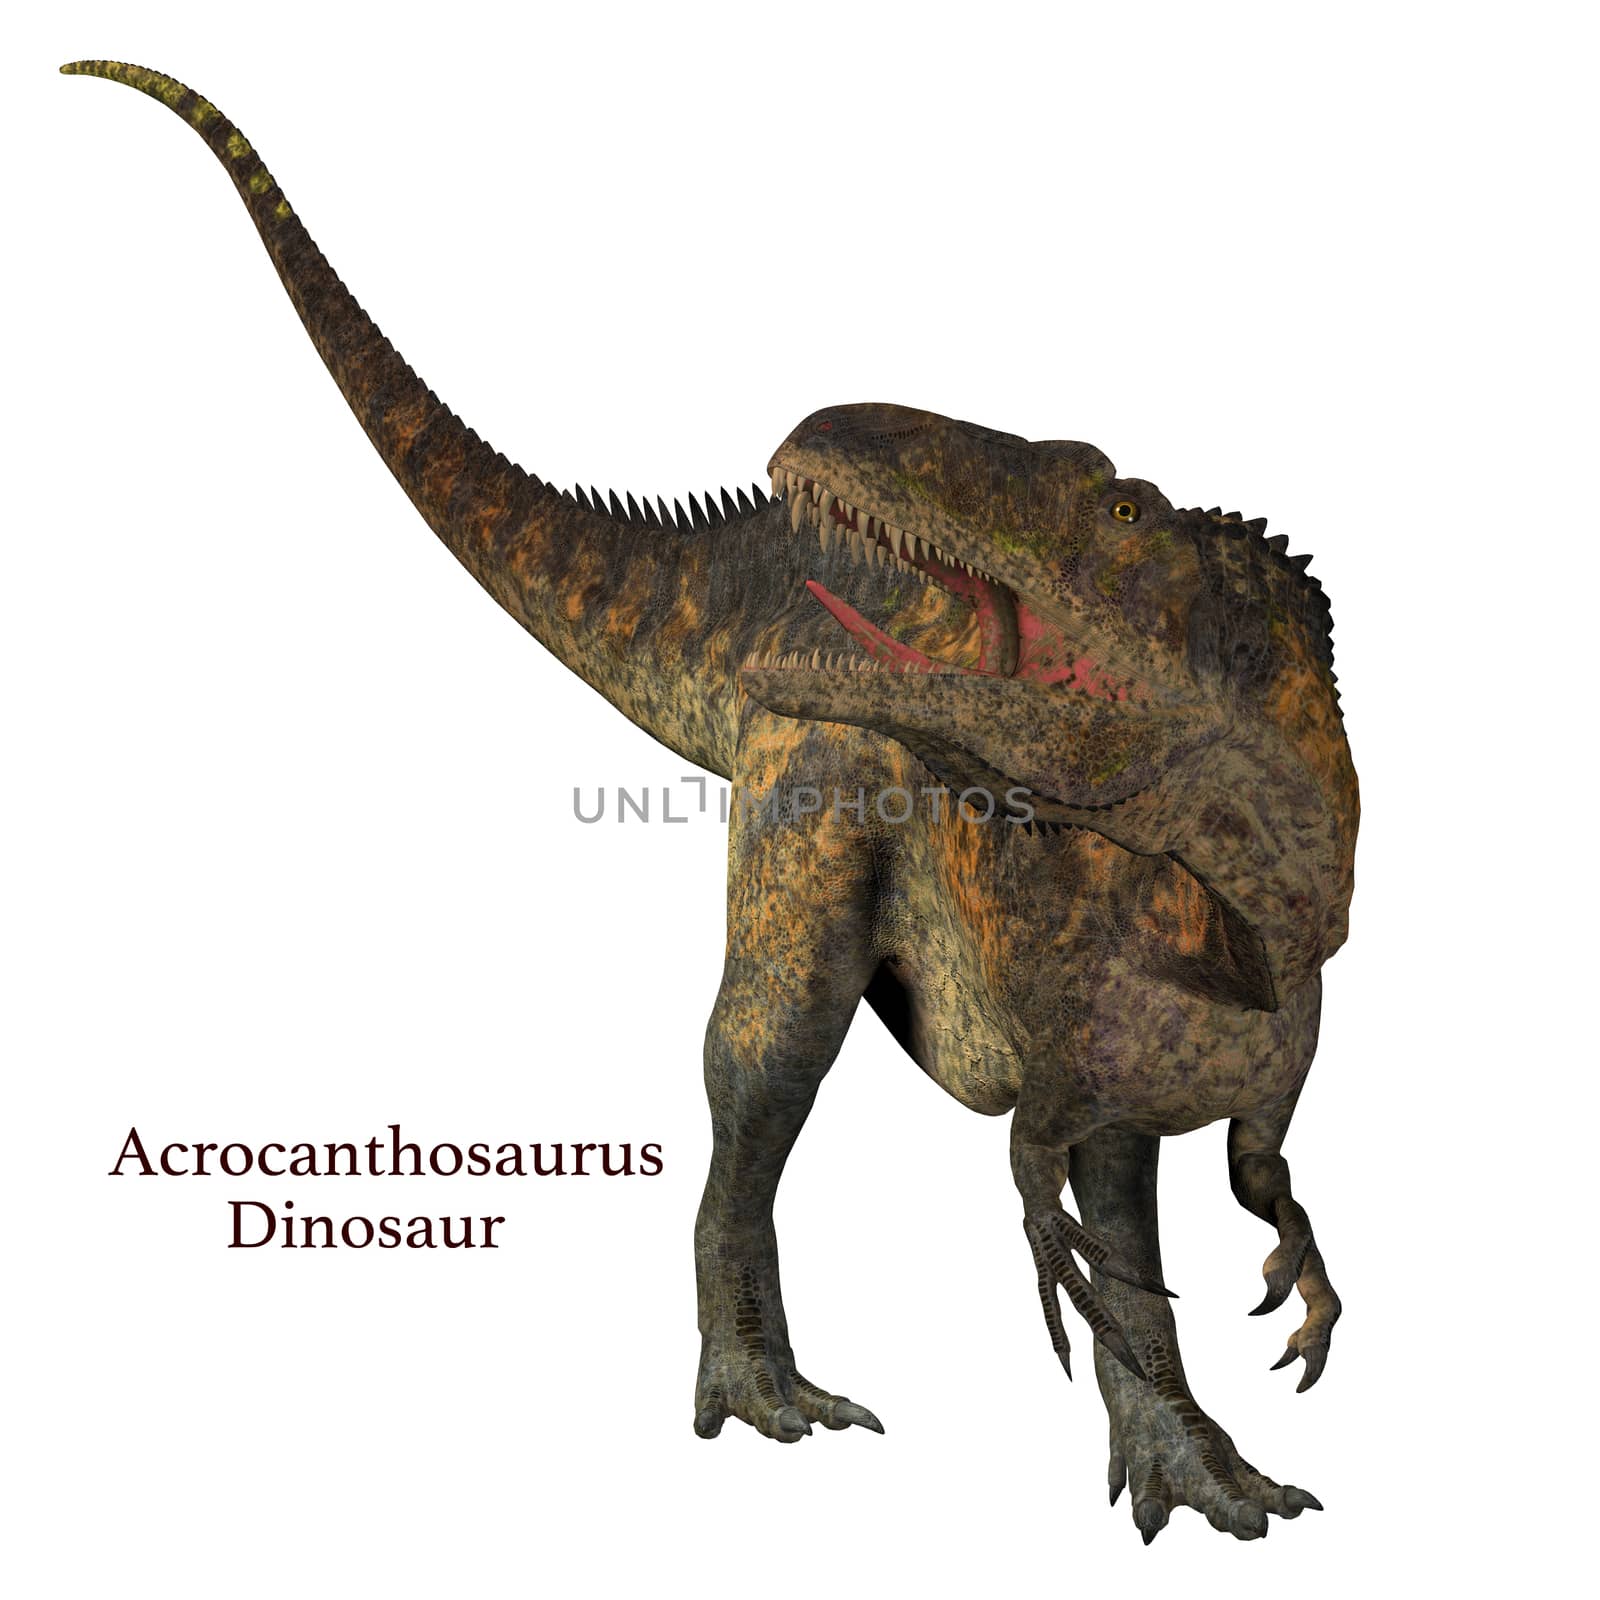 Acrocanthosaurus Dinosaur Tail with Font by Catmando